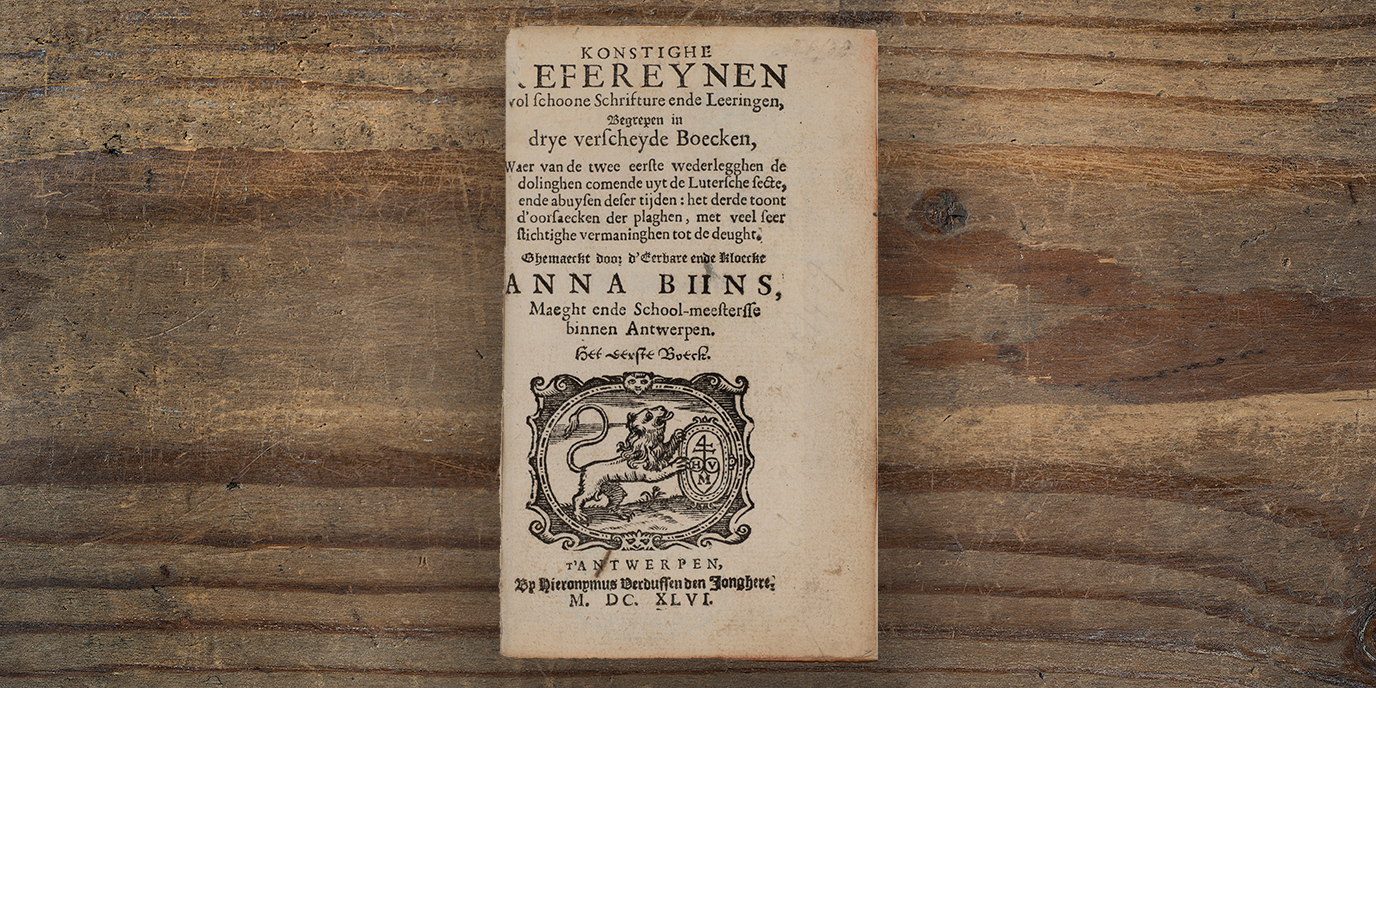 The preface of this seventeenth-century book is considerable. On the title page, Bijns is introduced as ‘Maiden and Schoolmistress’ – not as a poet.[9] In comparison, in "De Const van Rhetoriken" De Castelein is introduced as an ‘excellent modern poet’.